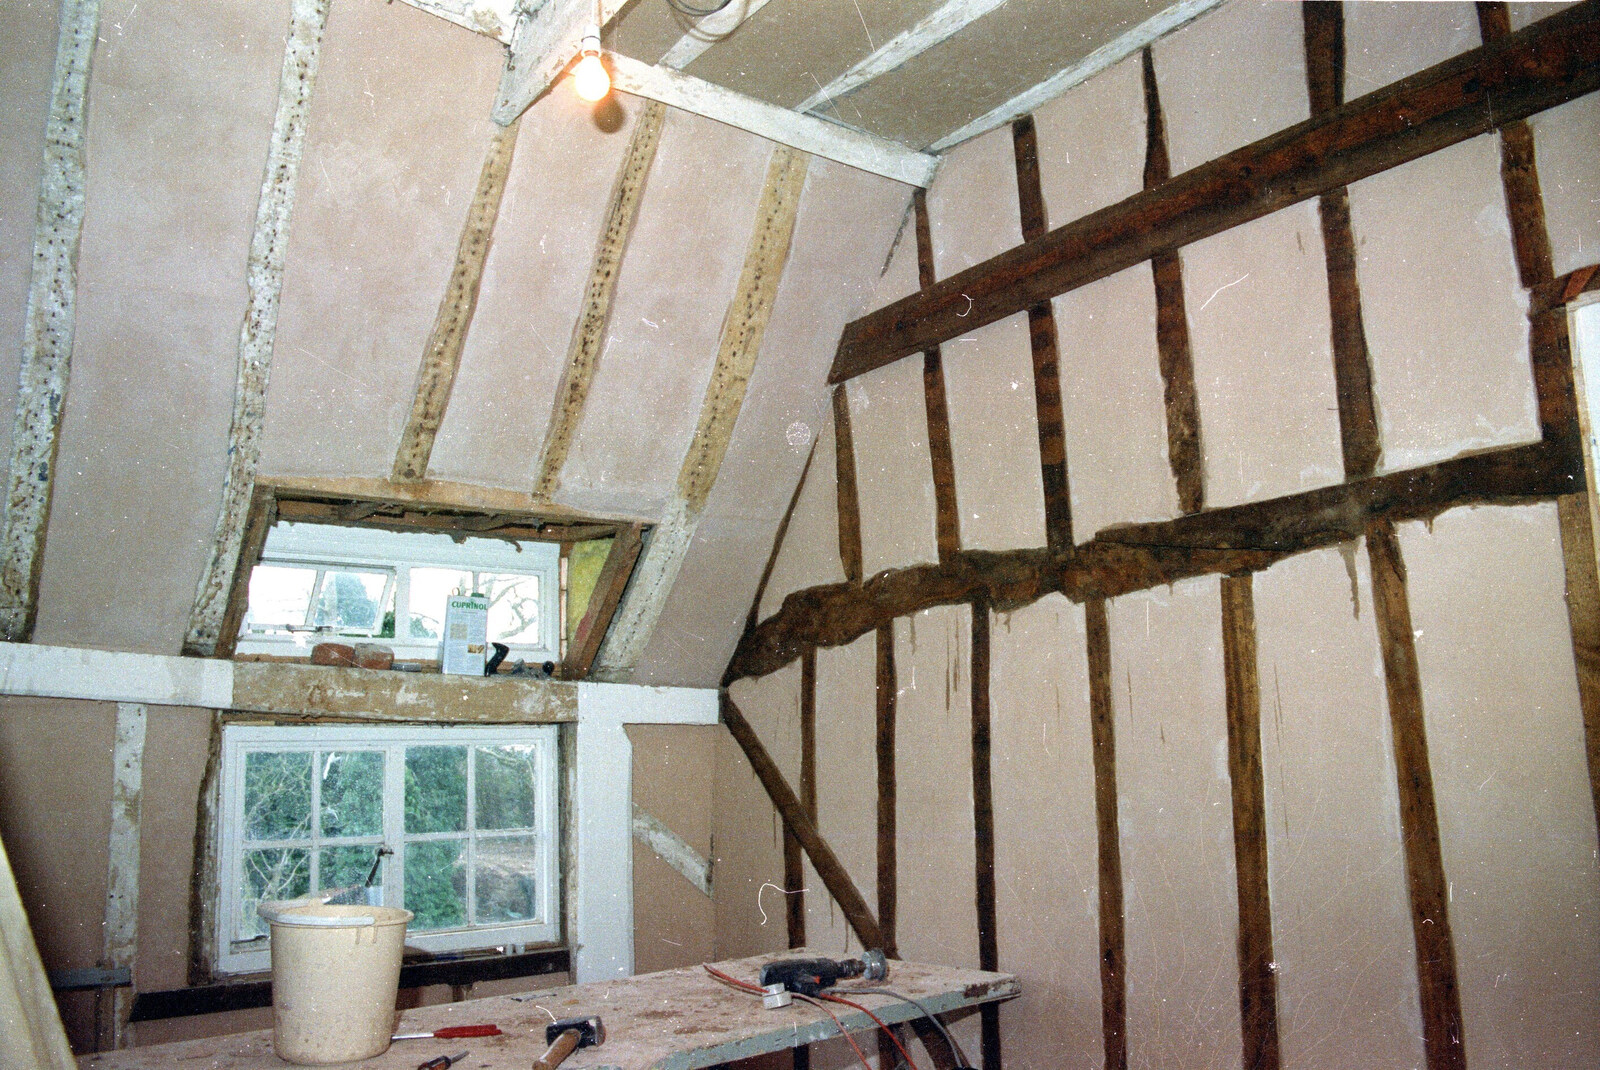 Off-Roading and Photos of The Swan, Brome, Suffolk - 20th May 1995: The bedroom takes shape